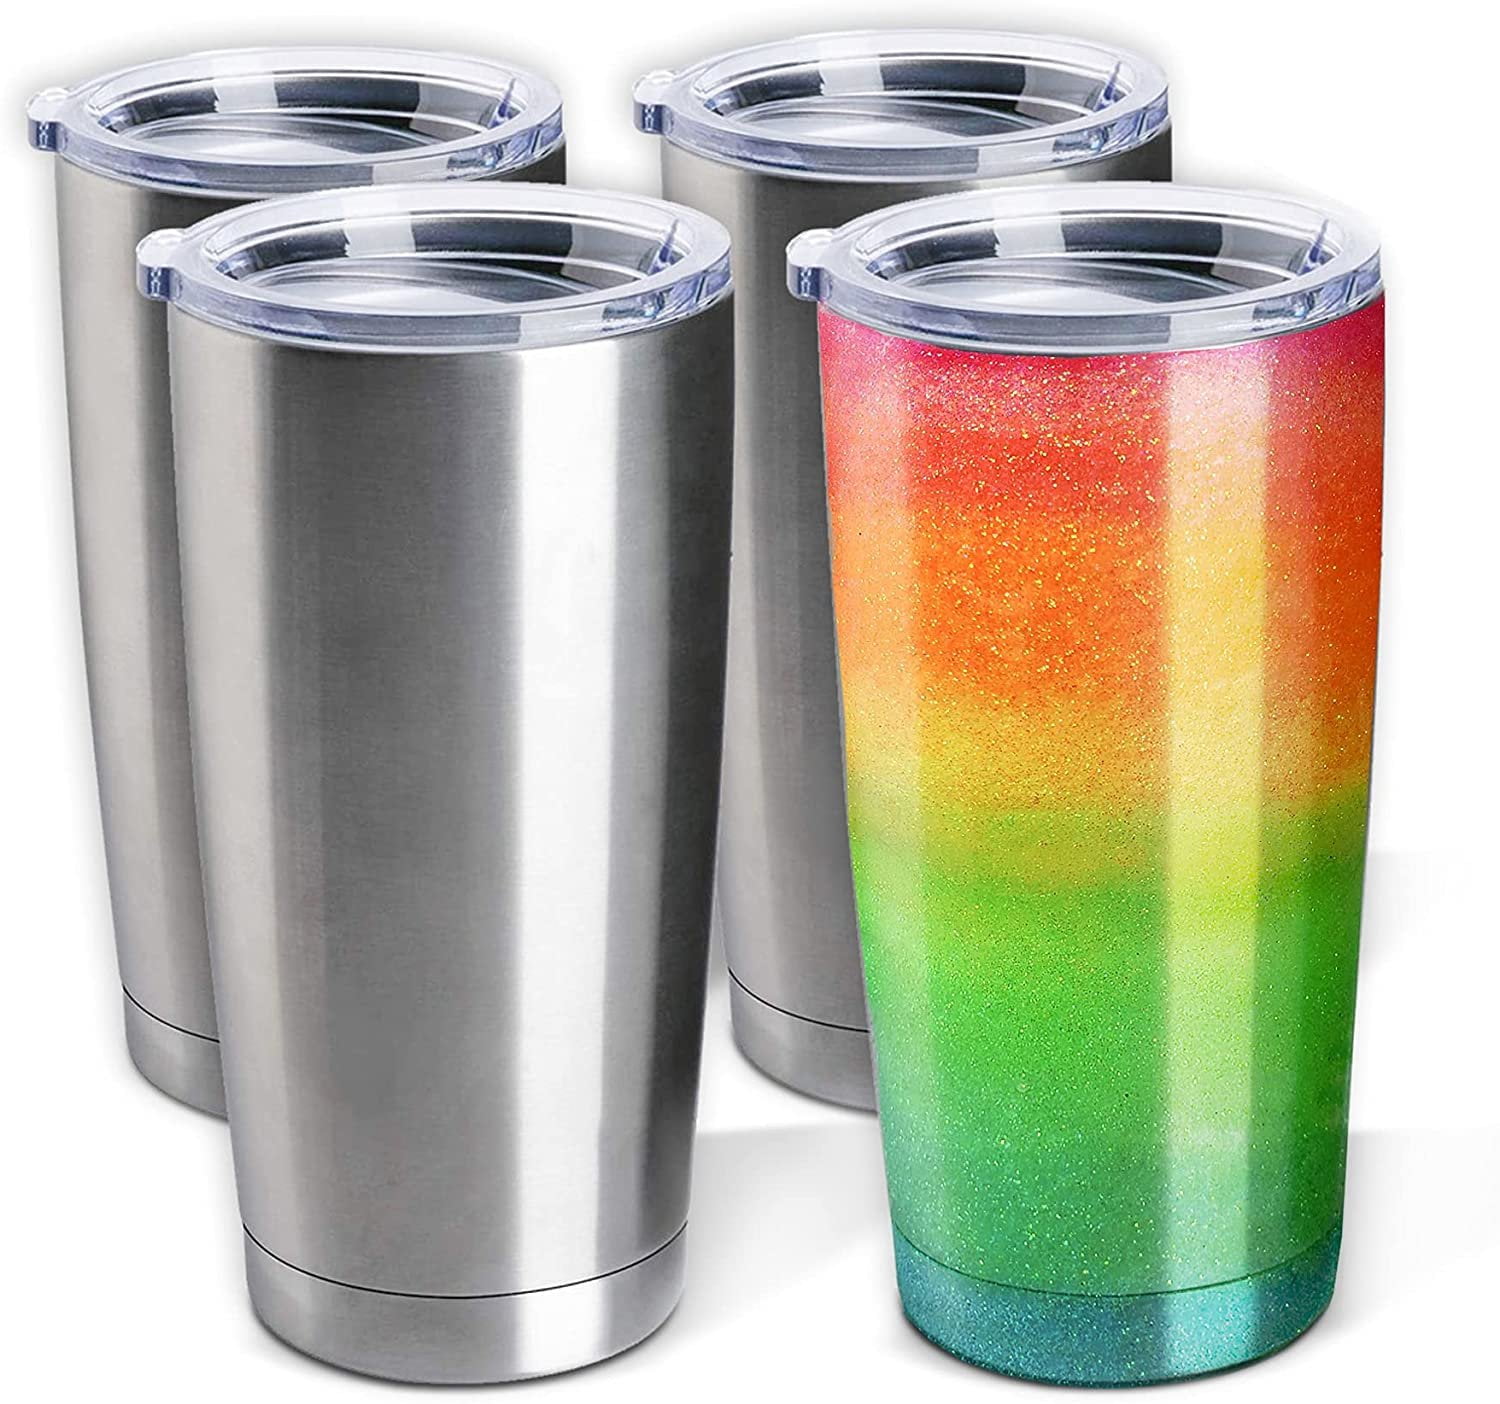 Offiper Stainless Steel Cups Double Wall, 10 oz Insulated Tumbler, 4 Pack  Unbreakable Stackable Wate…See more Offiper Stainless Steel Cups Double